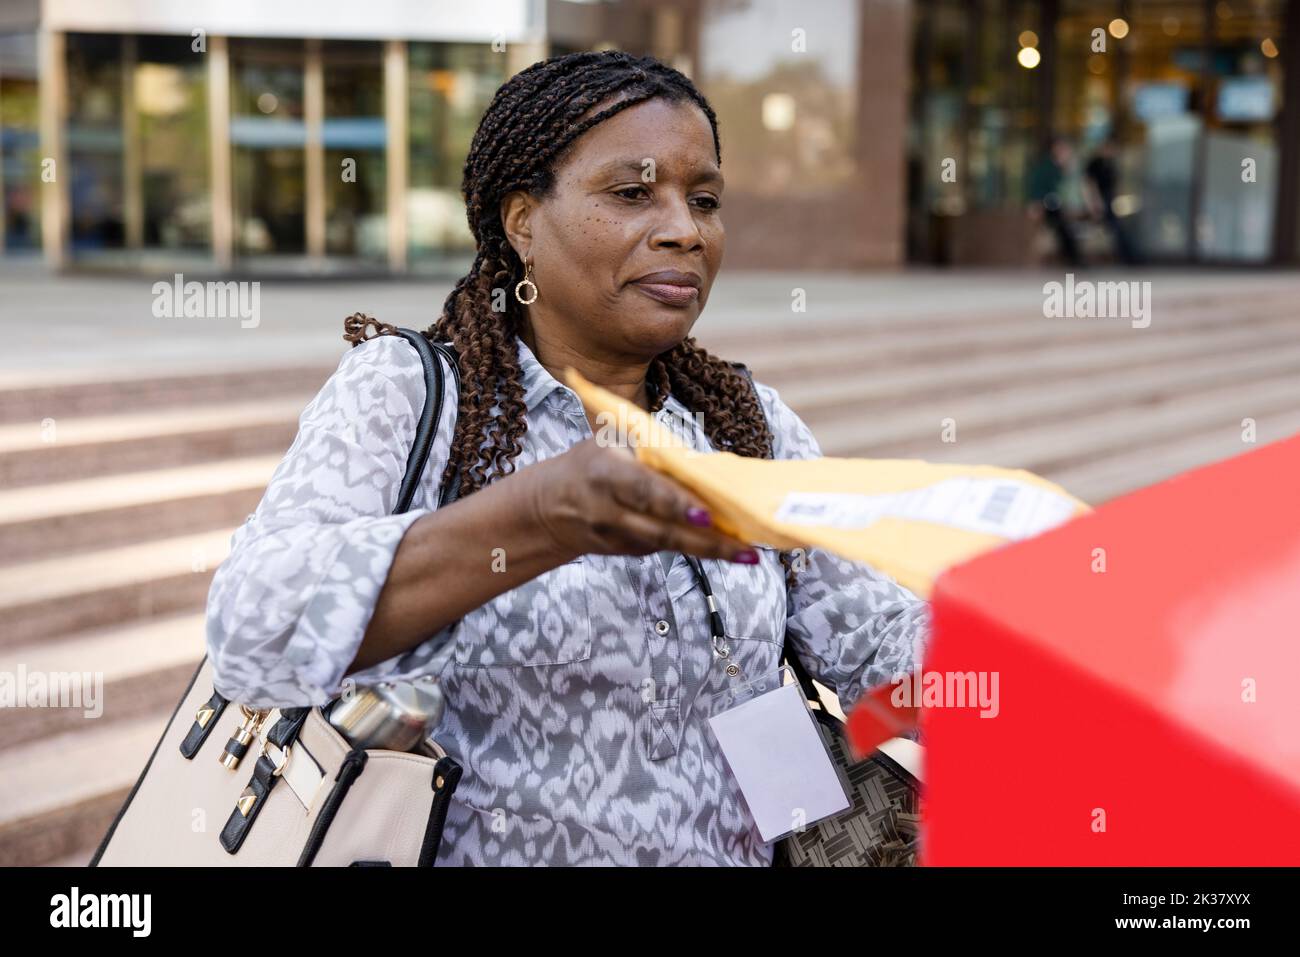 Woman with cornrow hair placing package into mailbox Stock Photo